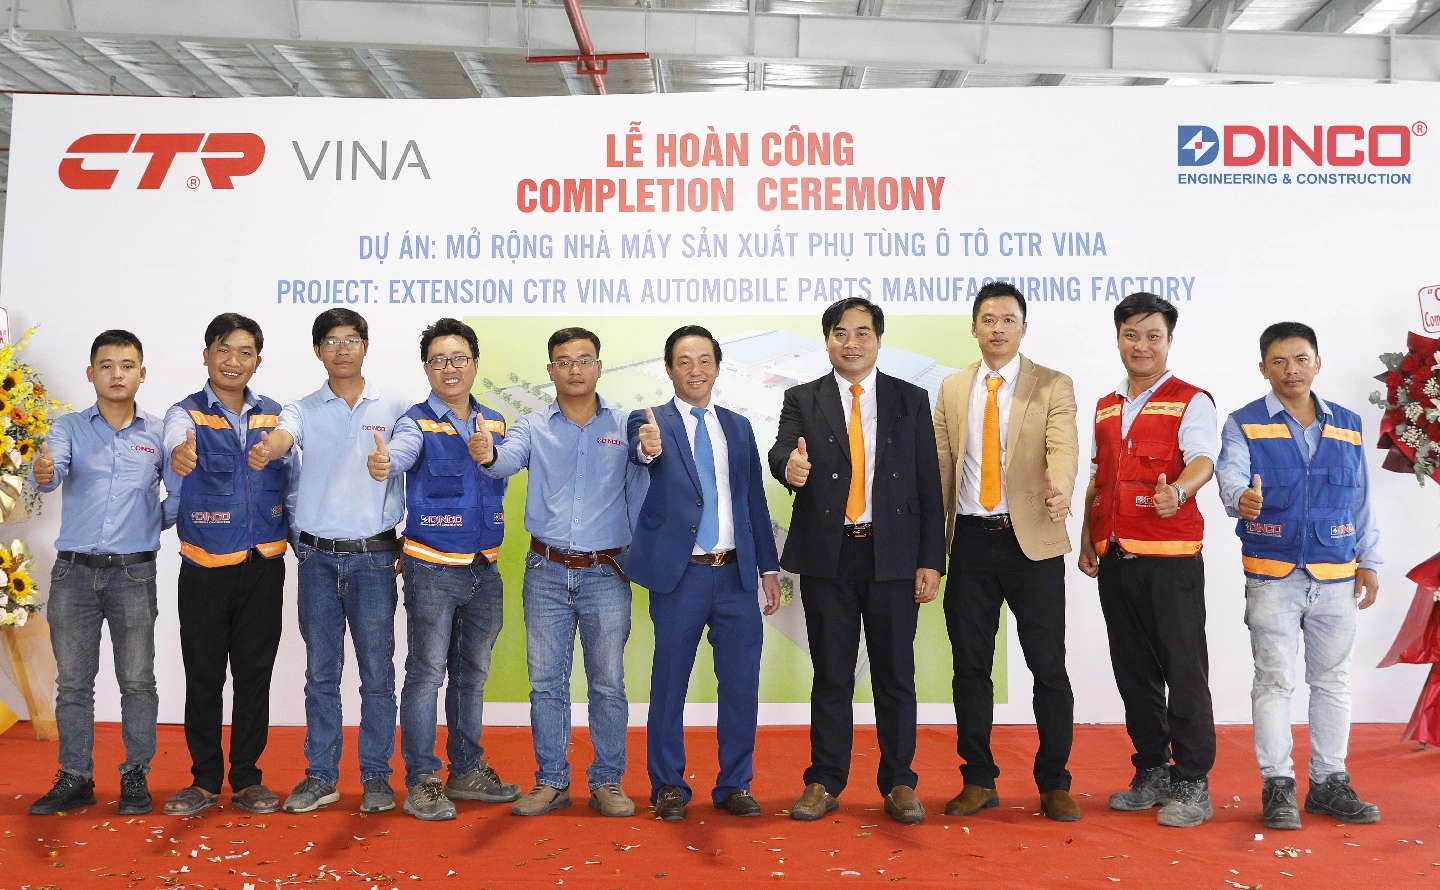 CONGRATULATIONS TO THE MANAGEMENT BOARD OF EXTENSION PROJECT OF CTR VINA AUTOMOBILE PARTS MANUFACTURING FACTORY